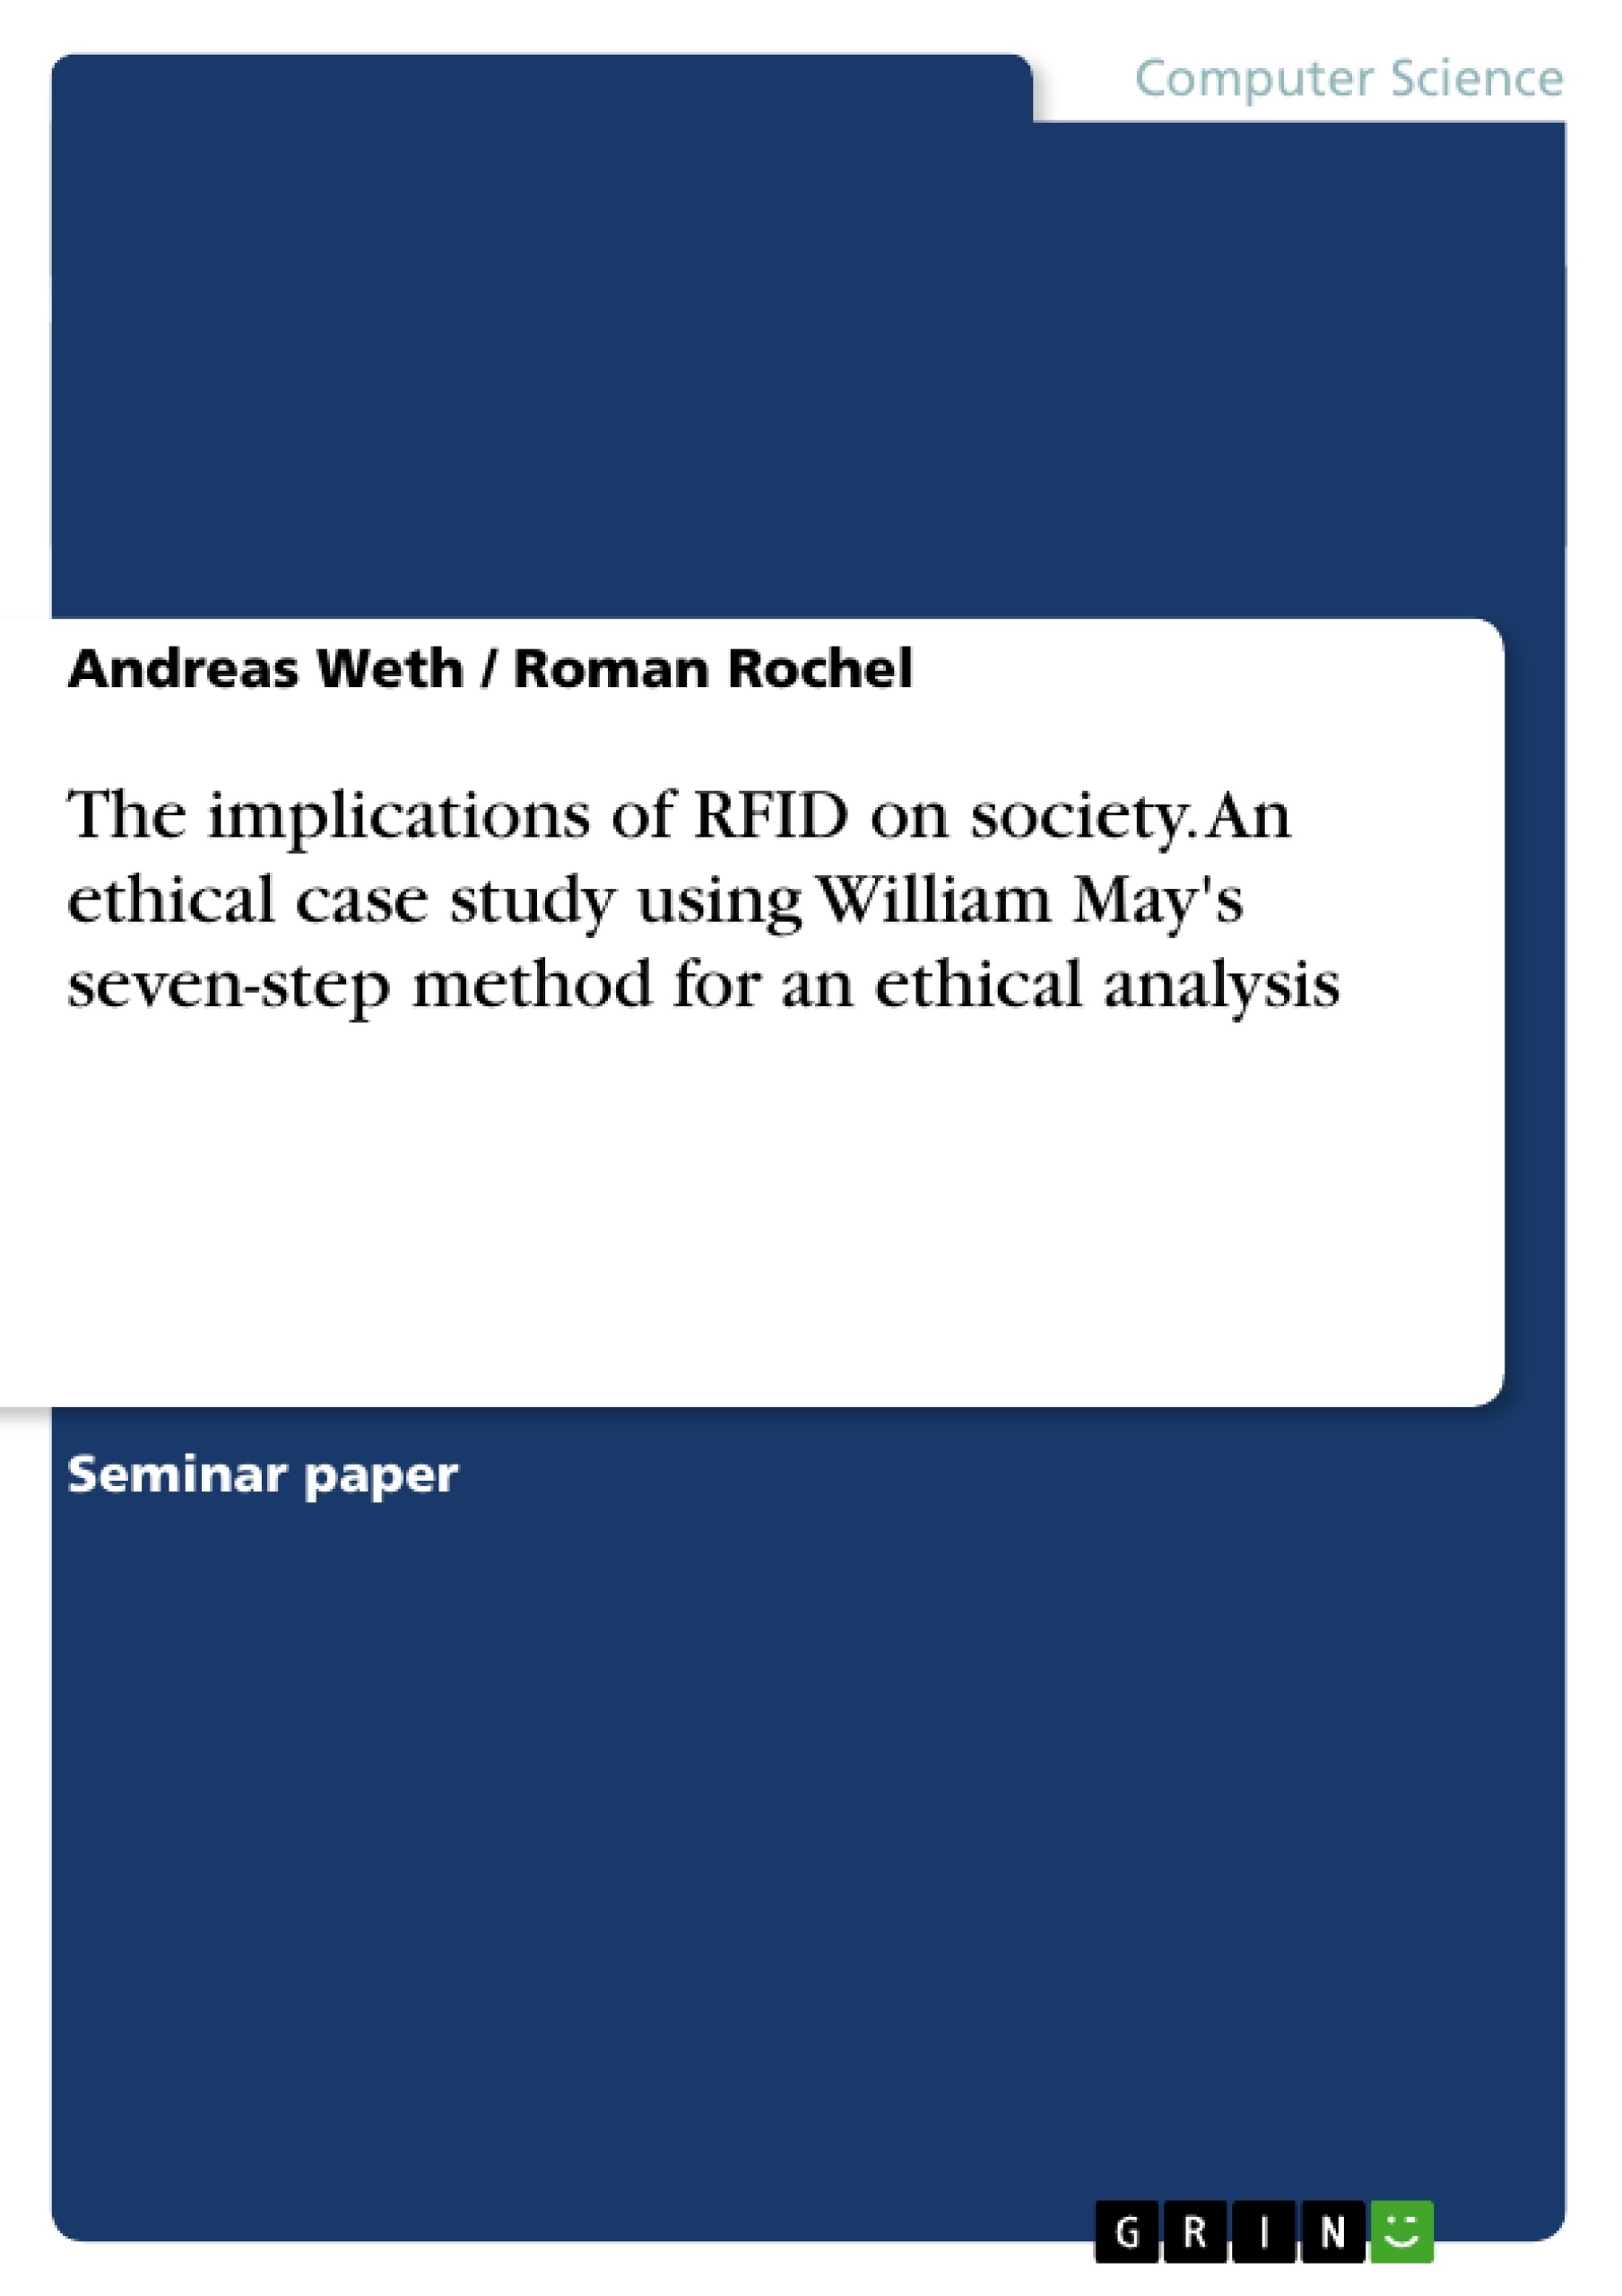 Title: The implications of RFID on society. An ethical case study using William May's seven-step method for an ethical analysis